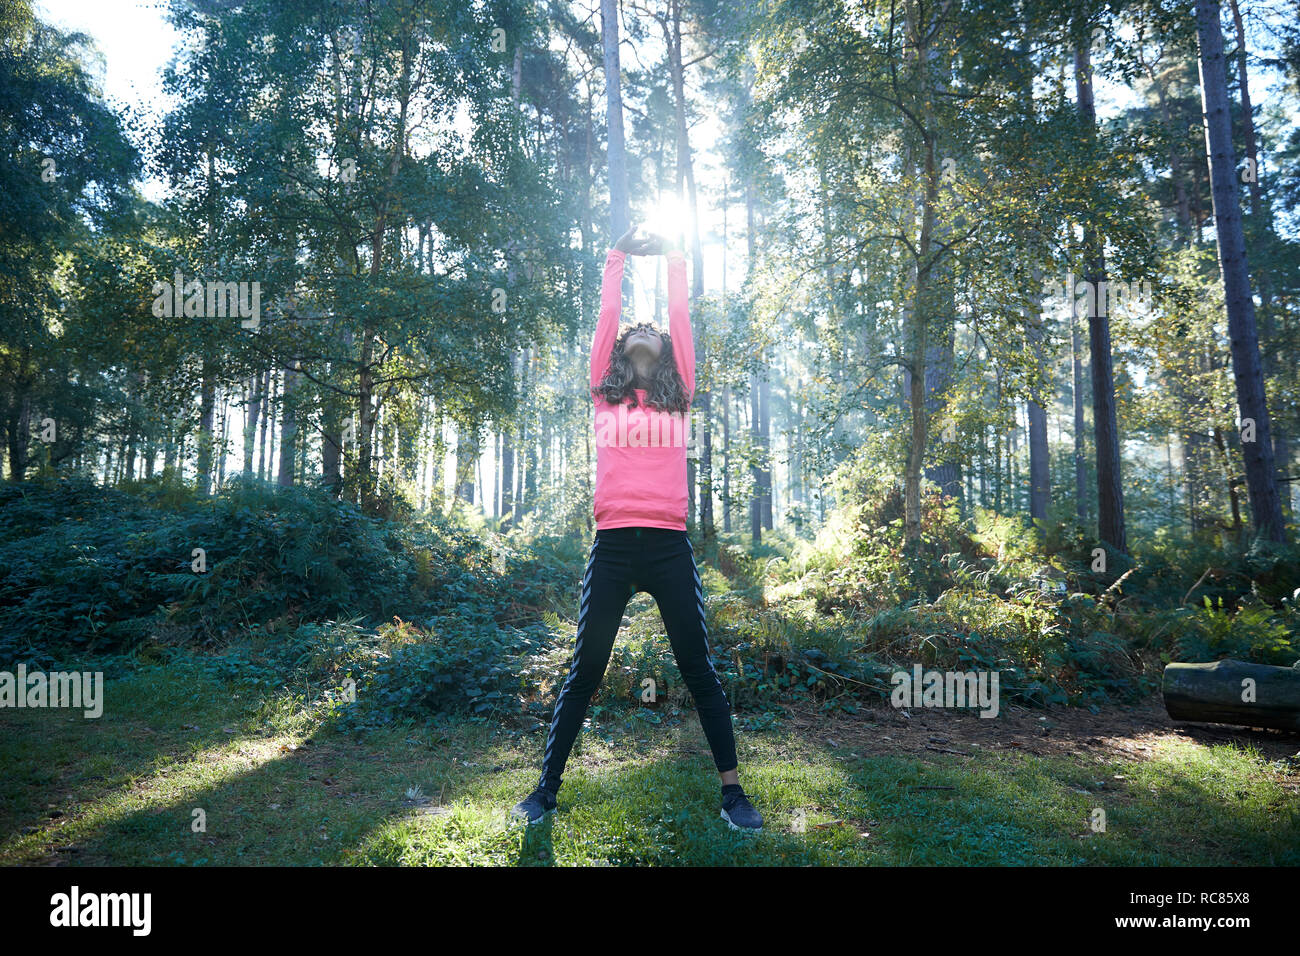 Female runner stretching arms and warming up in sunlit forest Stock Photo